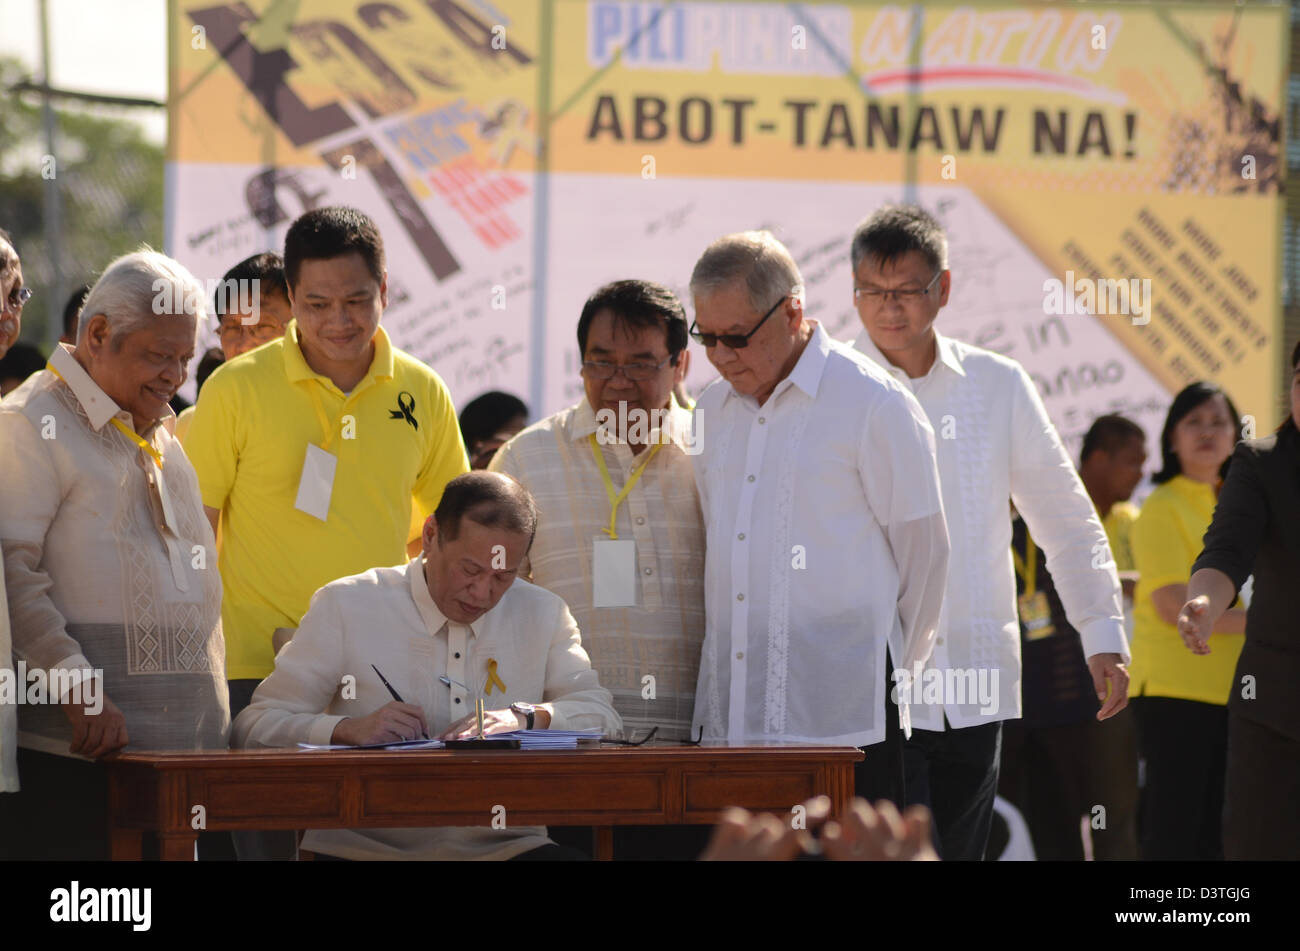 Quezon City, Manila, Philippines. 25th February 2013.  President Benigno Aquino III (sitting) signs into law the Human Rights Victims Reparation and Recognition Act of 2013, which grants reparation for human rights violations during the Martial Law rule of former president Ferdinand Marcos, during the commemoration of the 27th People Power Revolution on Monday, February 25. (Photo by Mark Demayo/Alamy Live News) Stock Photo